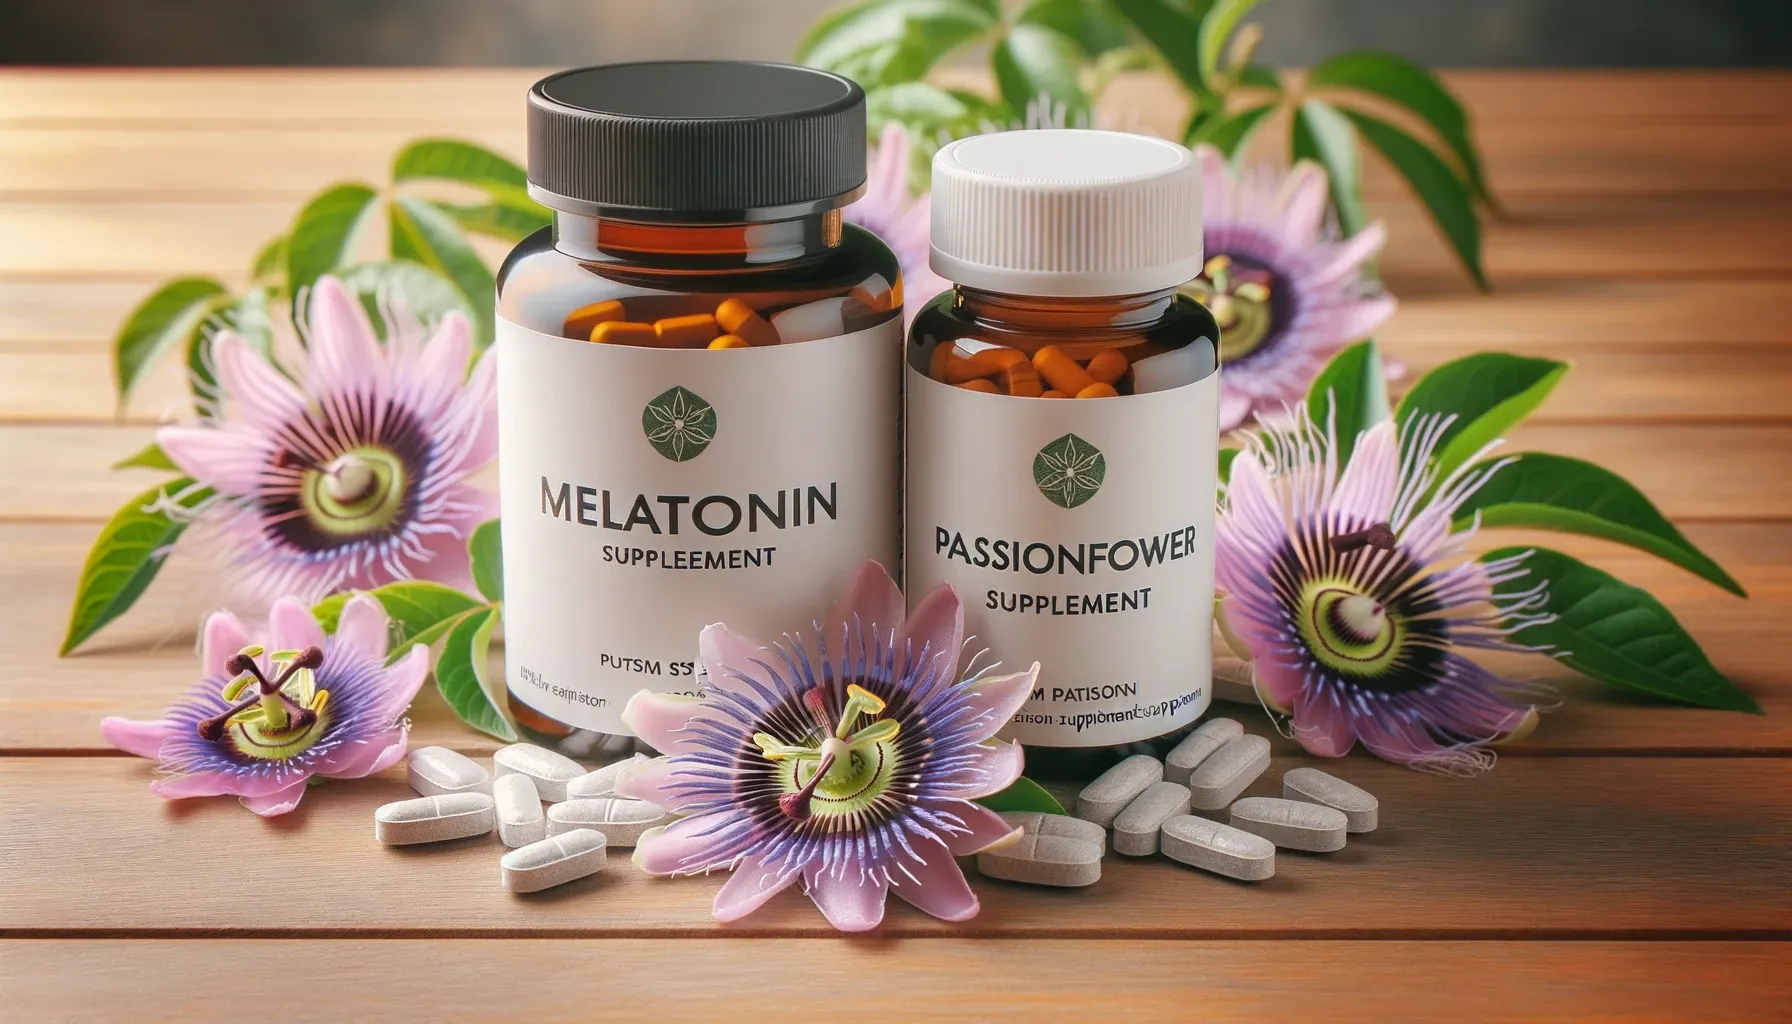 Vibrant-labeled melatonin and passionflower supplement bottles on a wooden table illuminated by bright light, surrounded by colorful passionflower blooms.